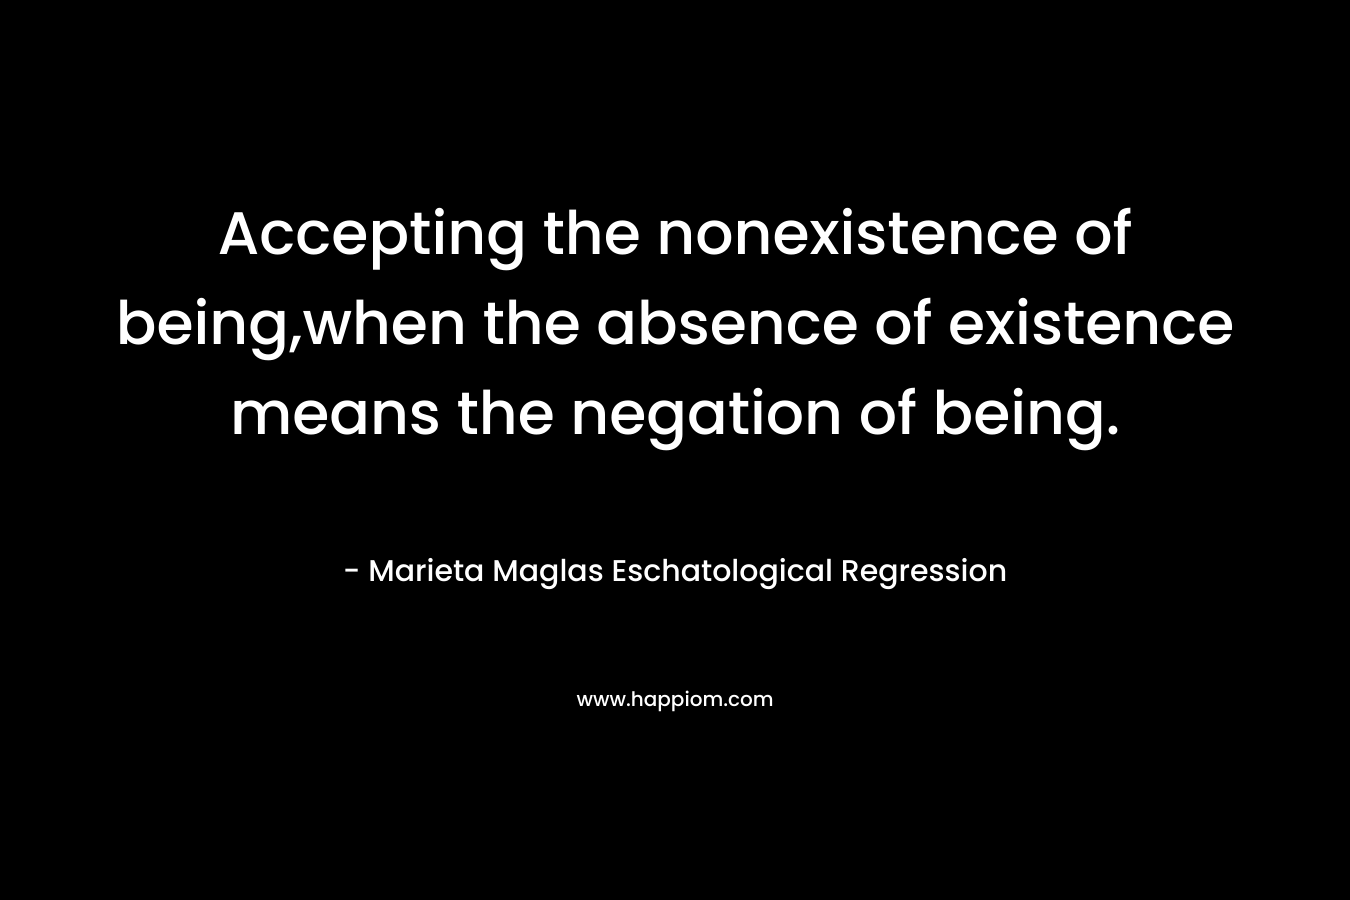 Accepting the nonexistence of being,when the absence of existence means the negation of being.